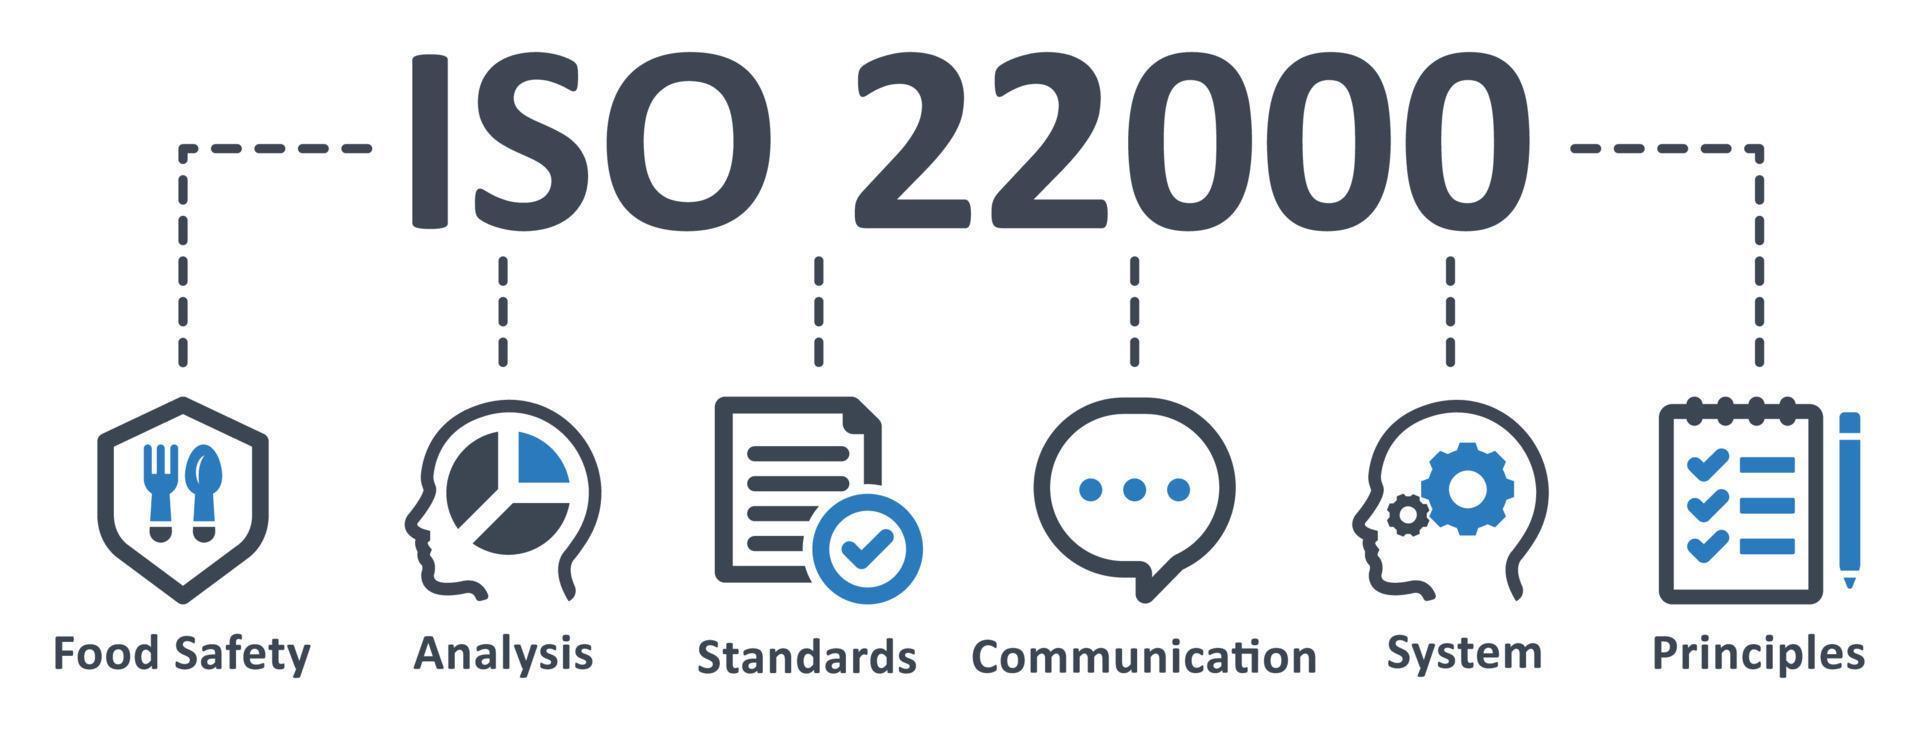 ISO 22000 icon - vector illustration . iso, food, safety, standard, certified, analysis, standards, system, management, infographic, template, concept, banner, pictogram, icon set, icons .